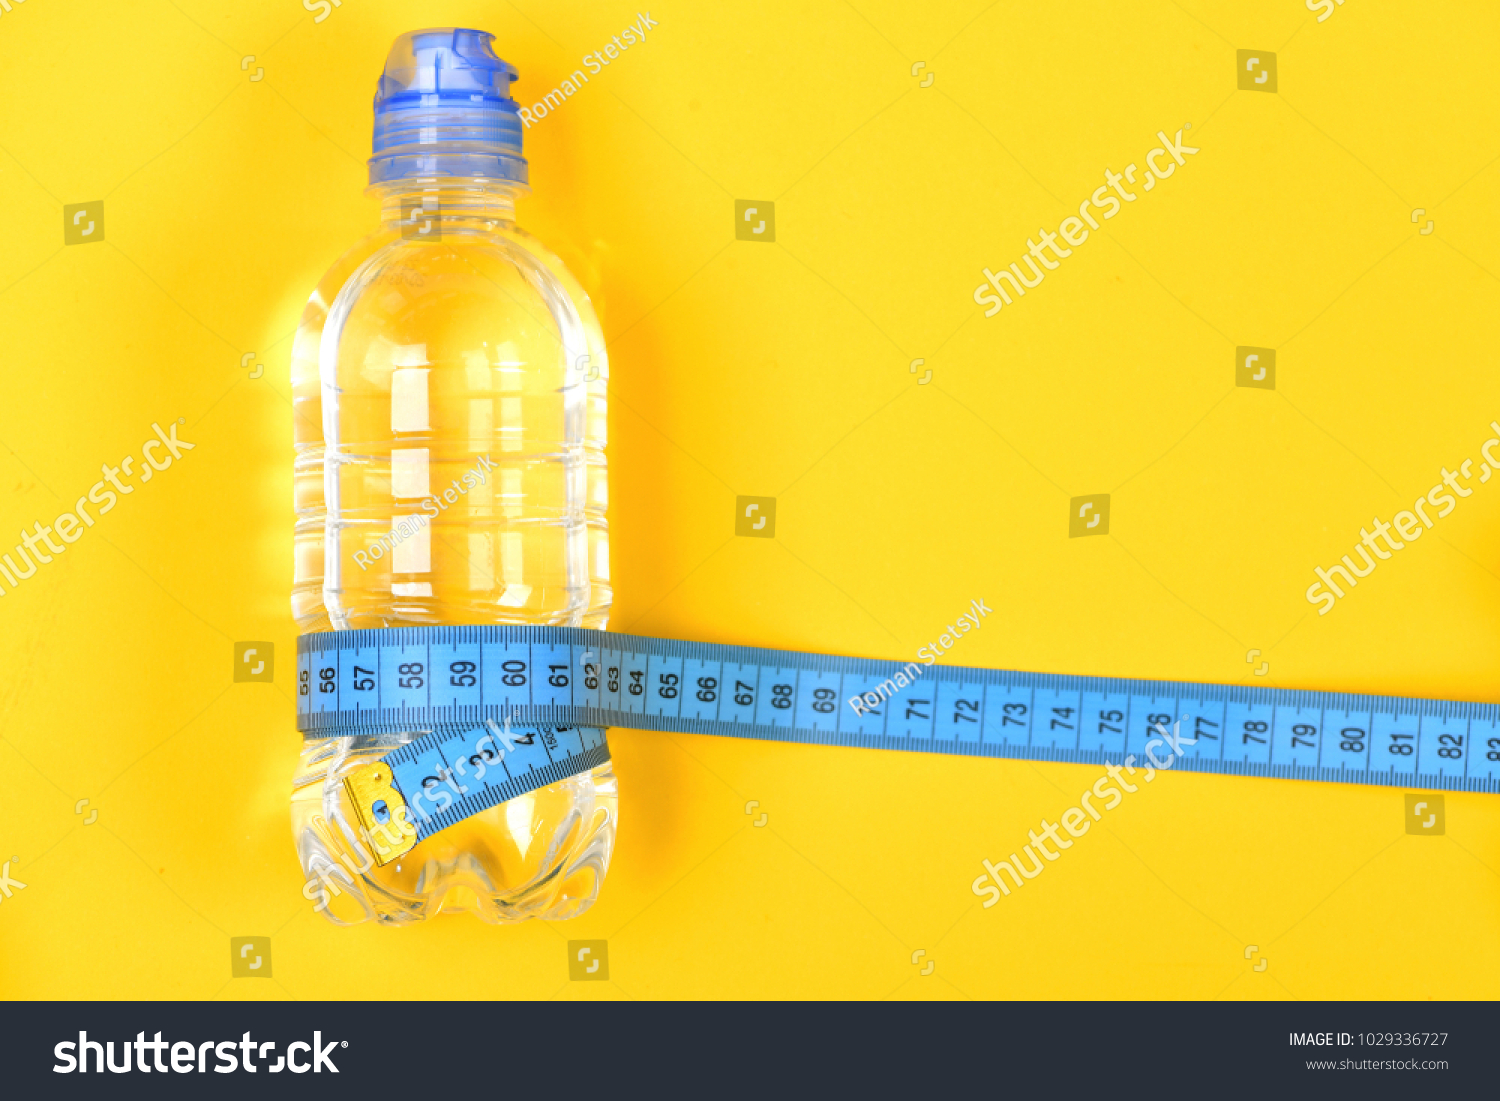 Download Bottle Water Fitness Equipment On Yellow Stock Photo Edit Now 1029336727 Yellowimages Mockups